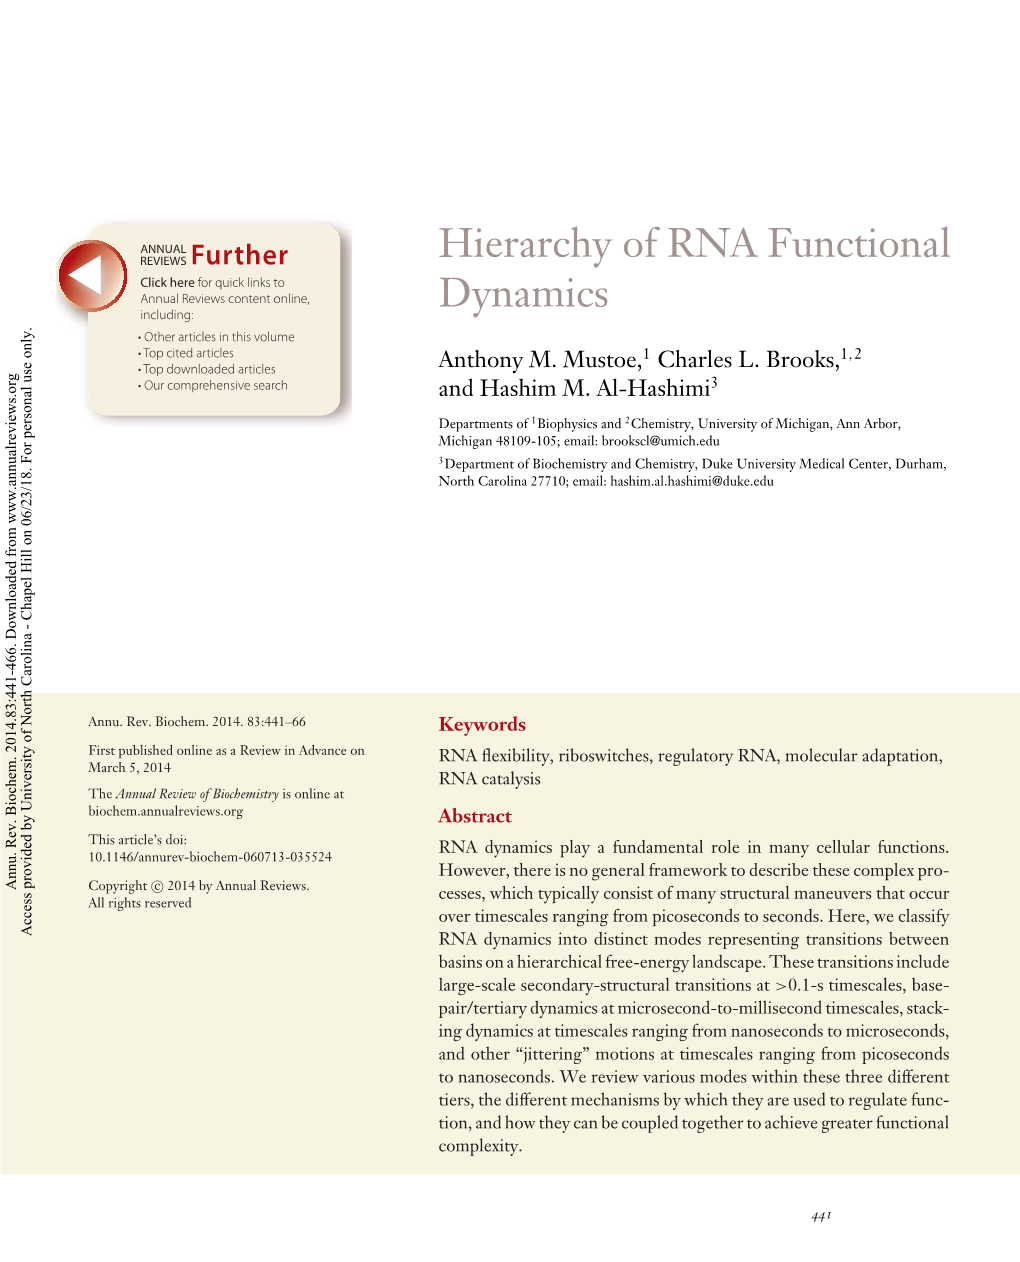 Hierarchy of RNA Functional Dynamics